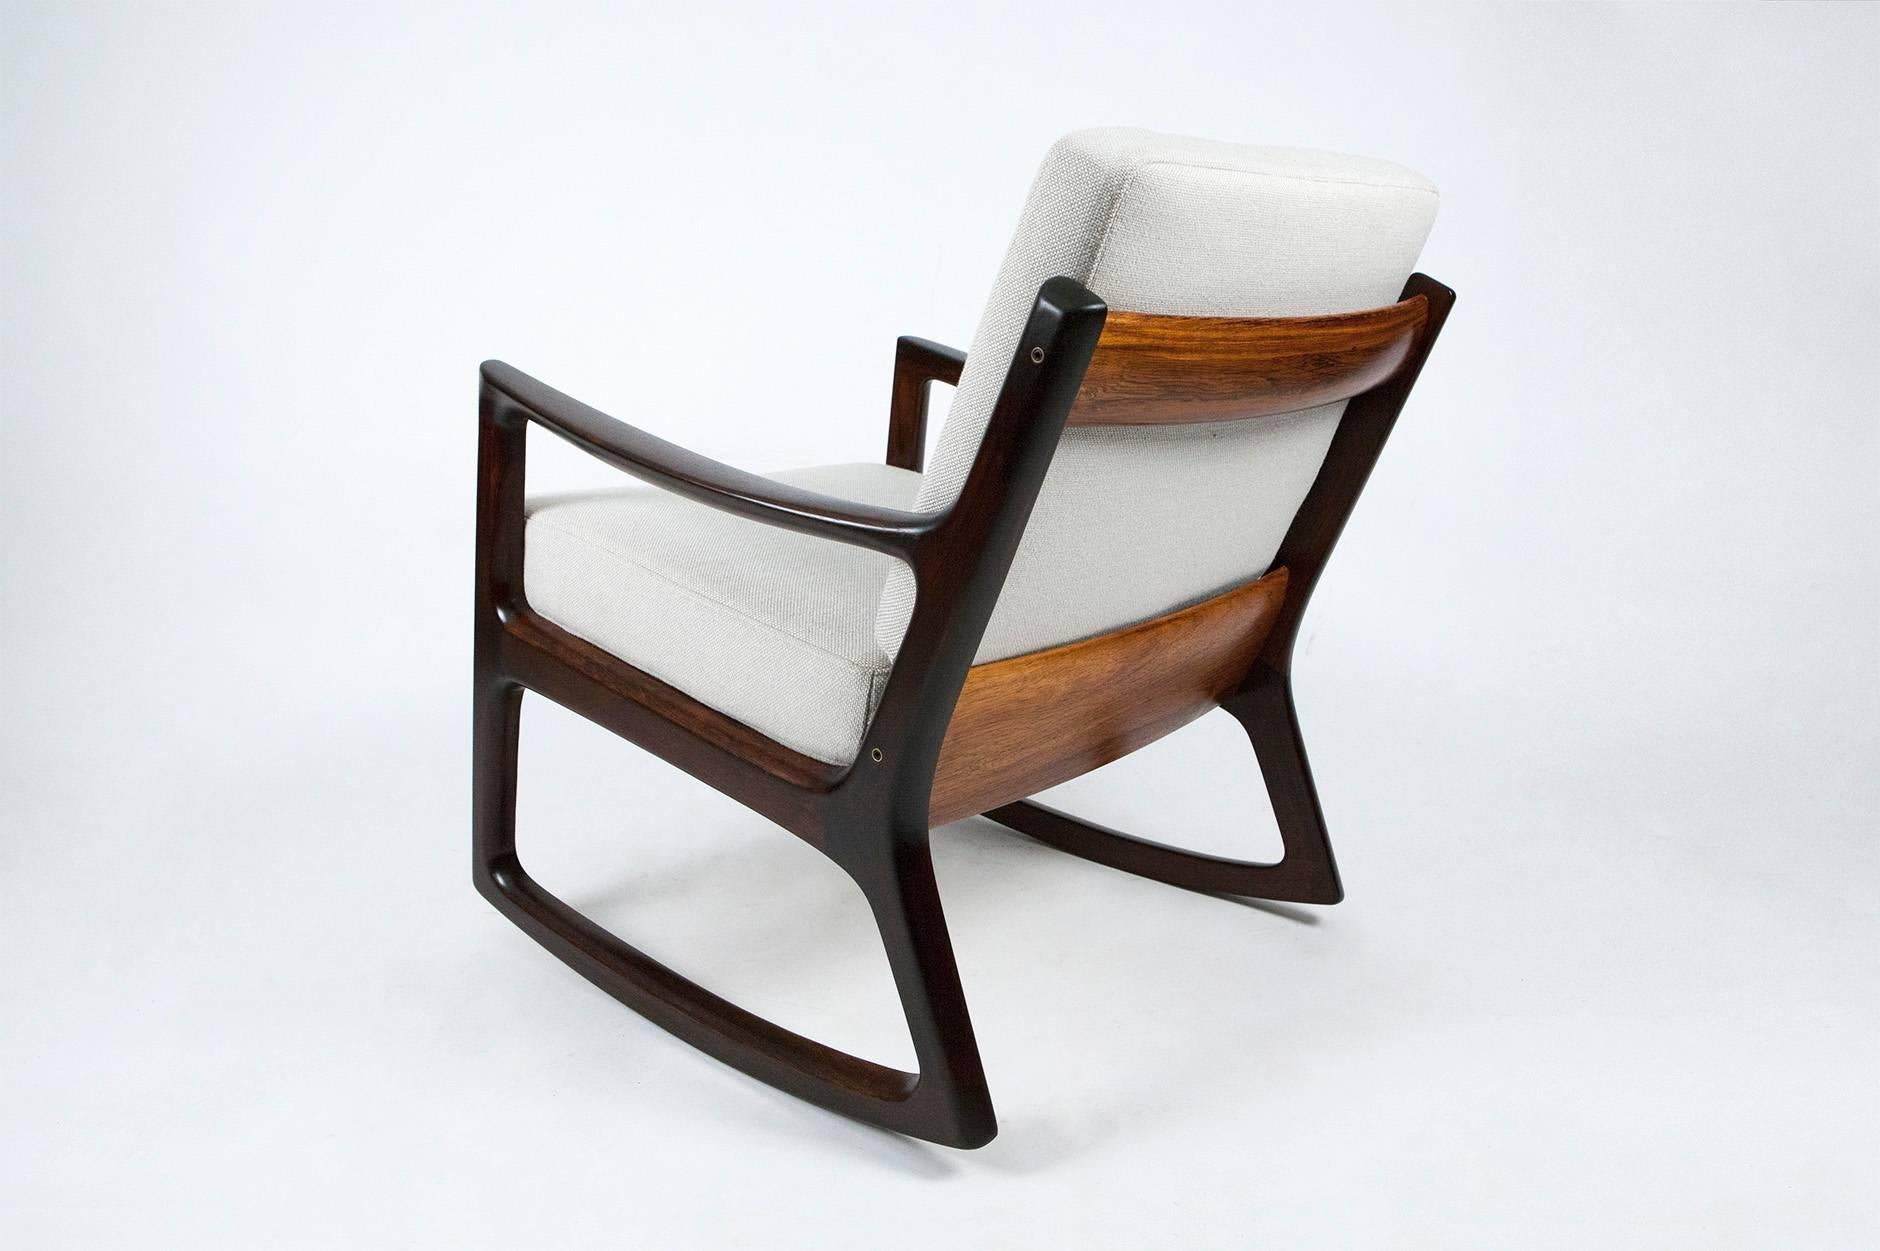 Rare rosewood edition of the 'Senator' rocking chair, circa 1960. Produced by France & Son, Denmark. Solid Brazilian rosewood. Includes maker's stamp and badge. New cushions covered in Kvadrat Hallingdal #103 wool fabric.